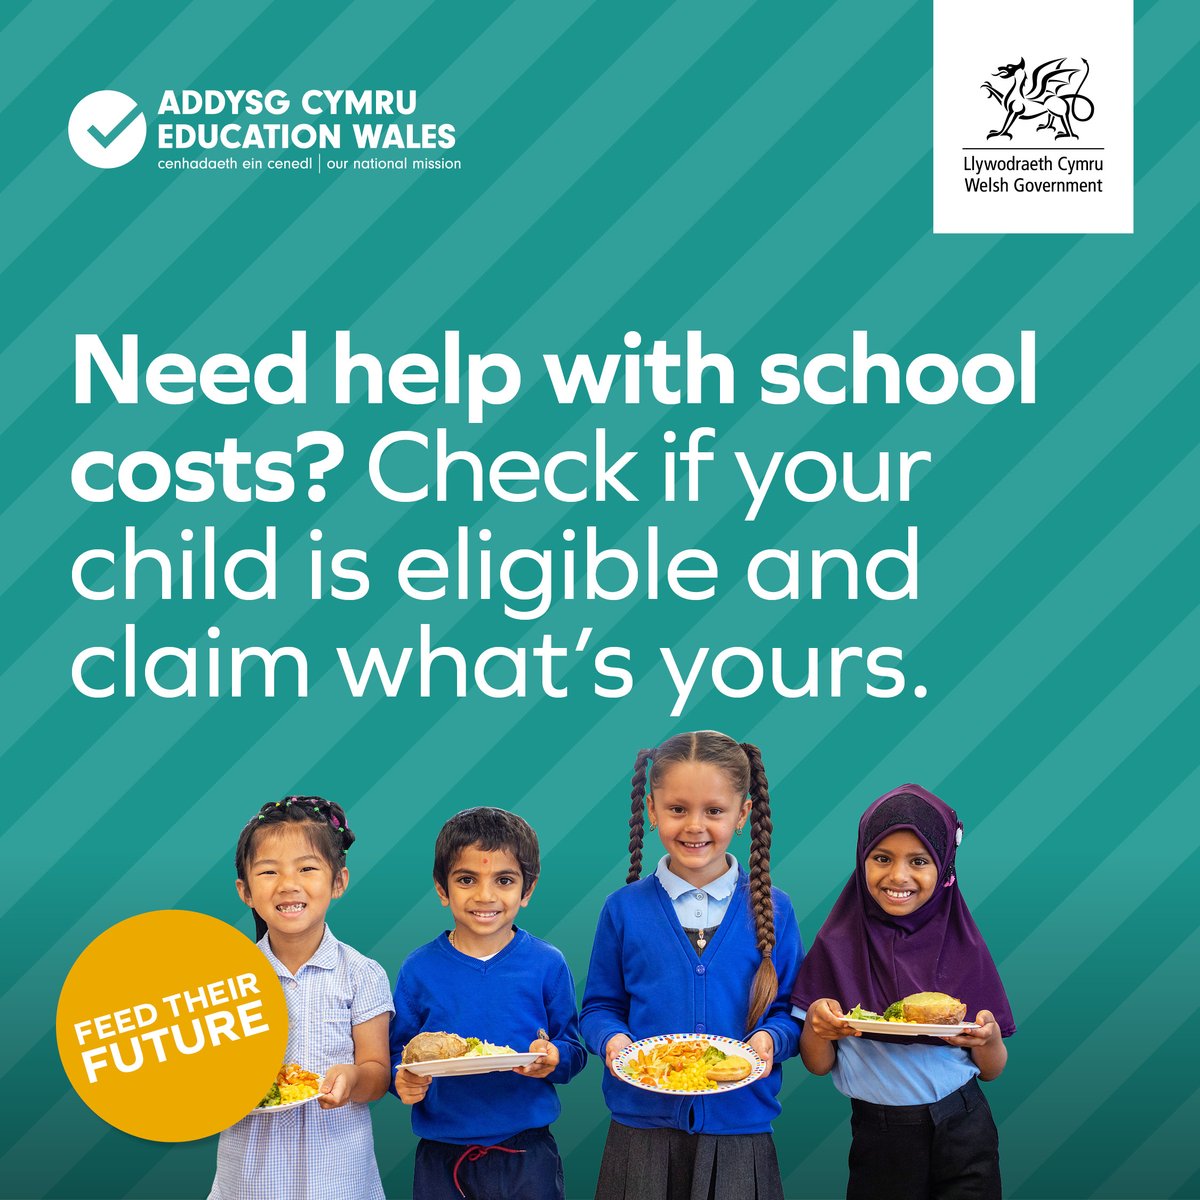 Are you worrying about schools costs?

You might be able to get help with the costs of uniform and other school essentials for your child.

We can help 👇
bridgend.gov.uk/residents/scho…

#FeedTheirFuture